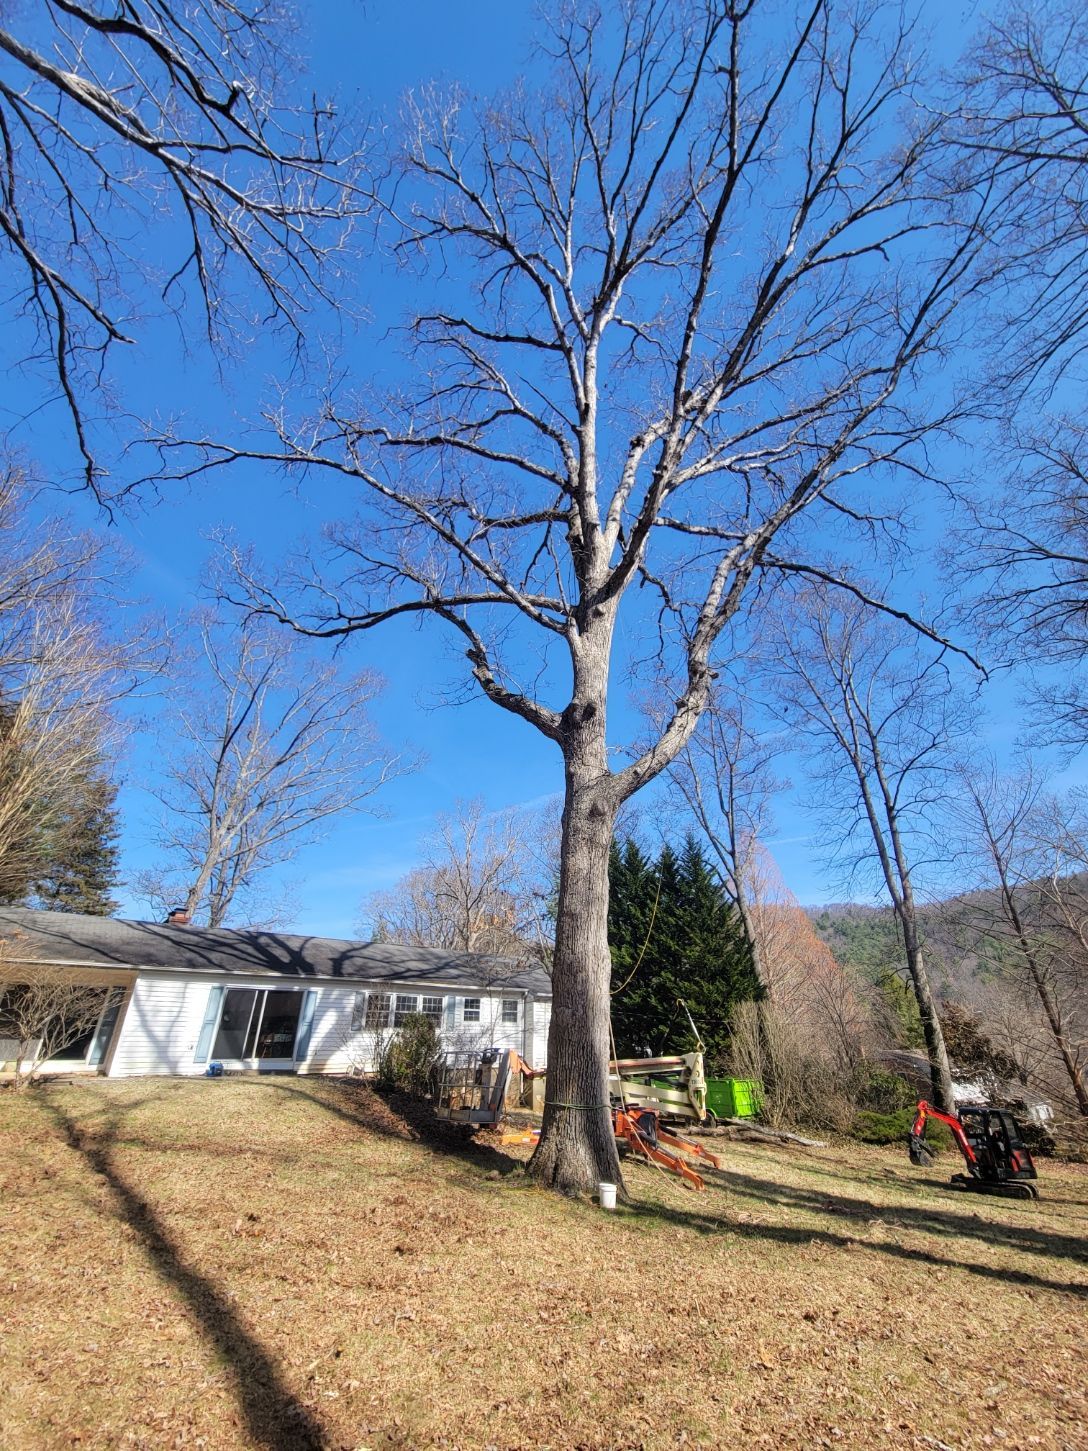 Large white oak removal in east Asheville